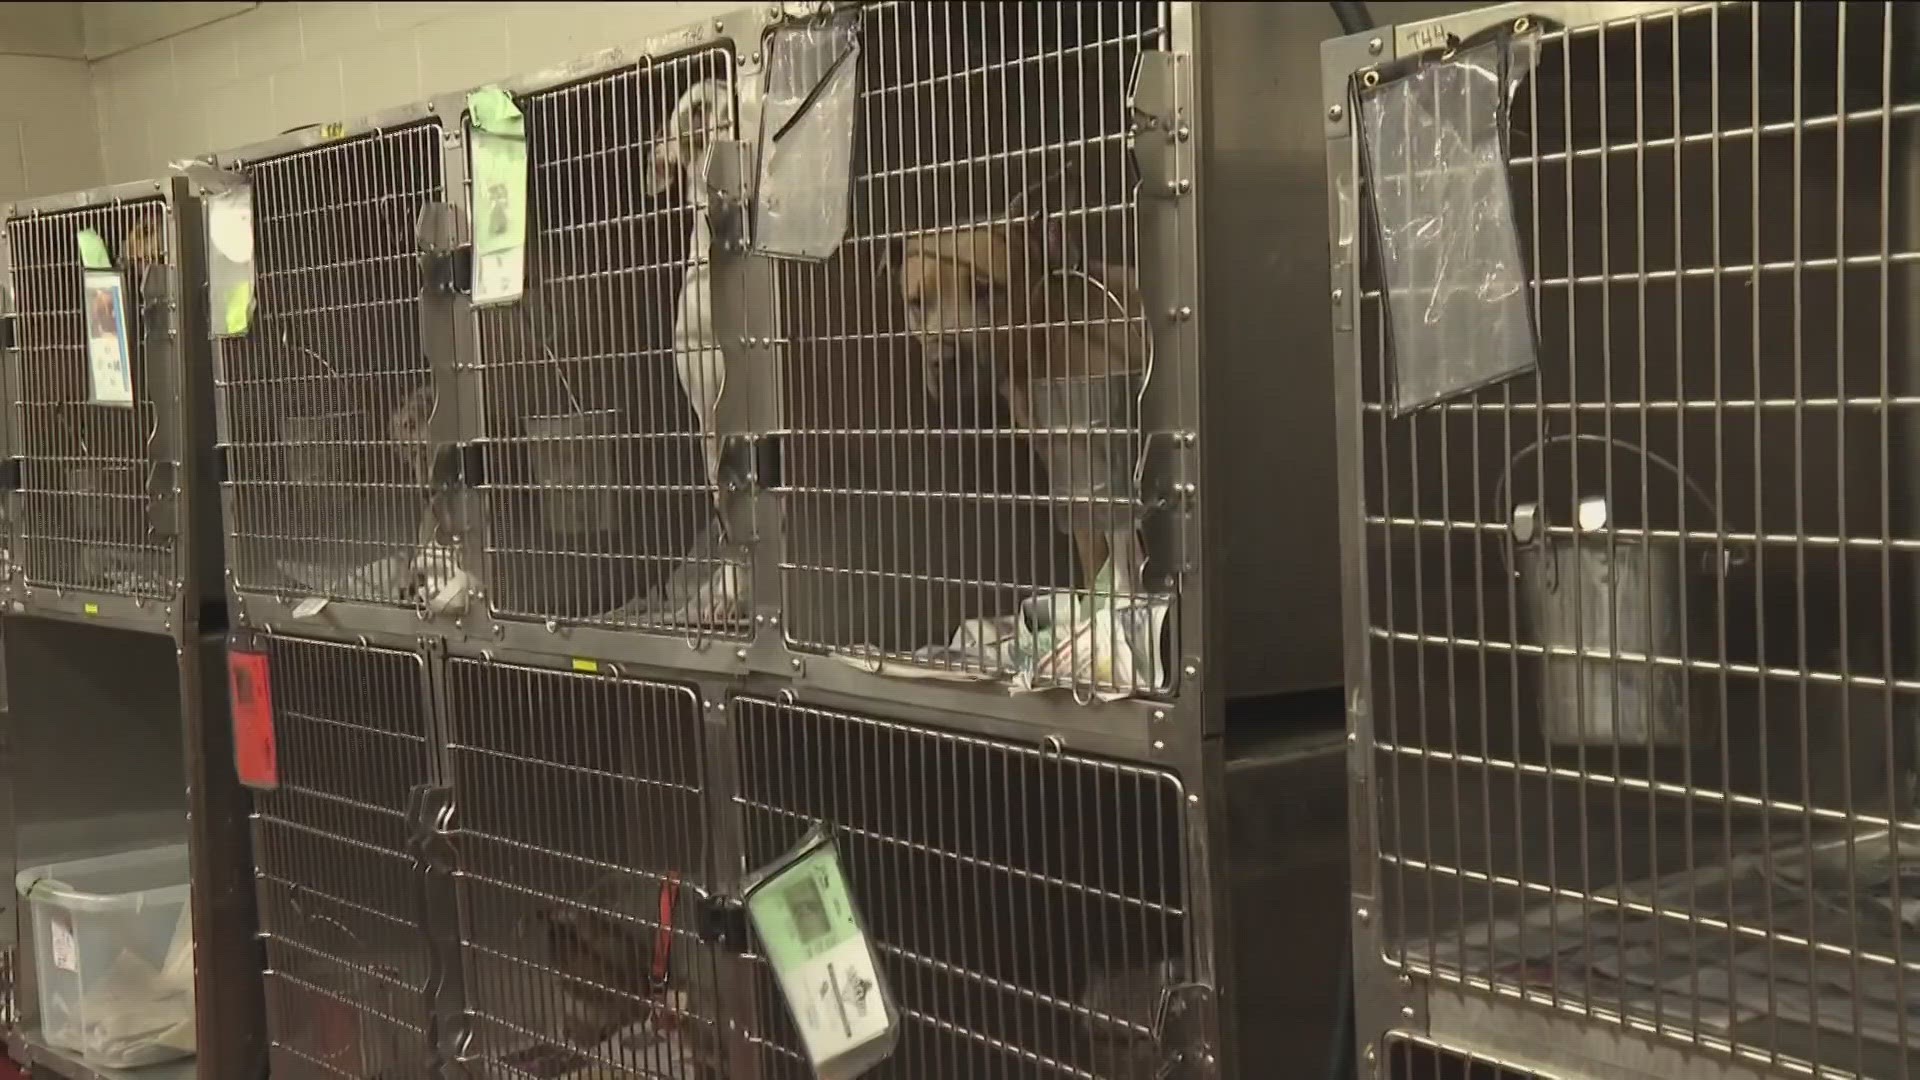 Dozens of dogs are being put down because of overcrowding.